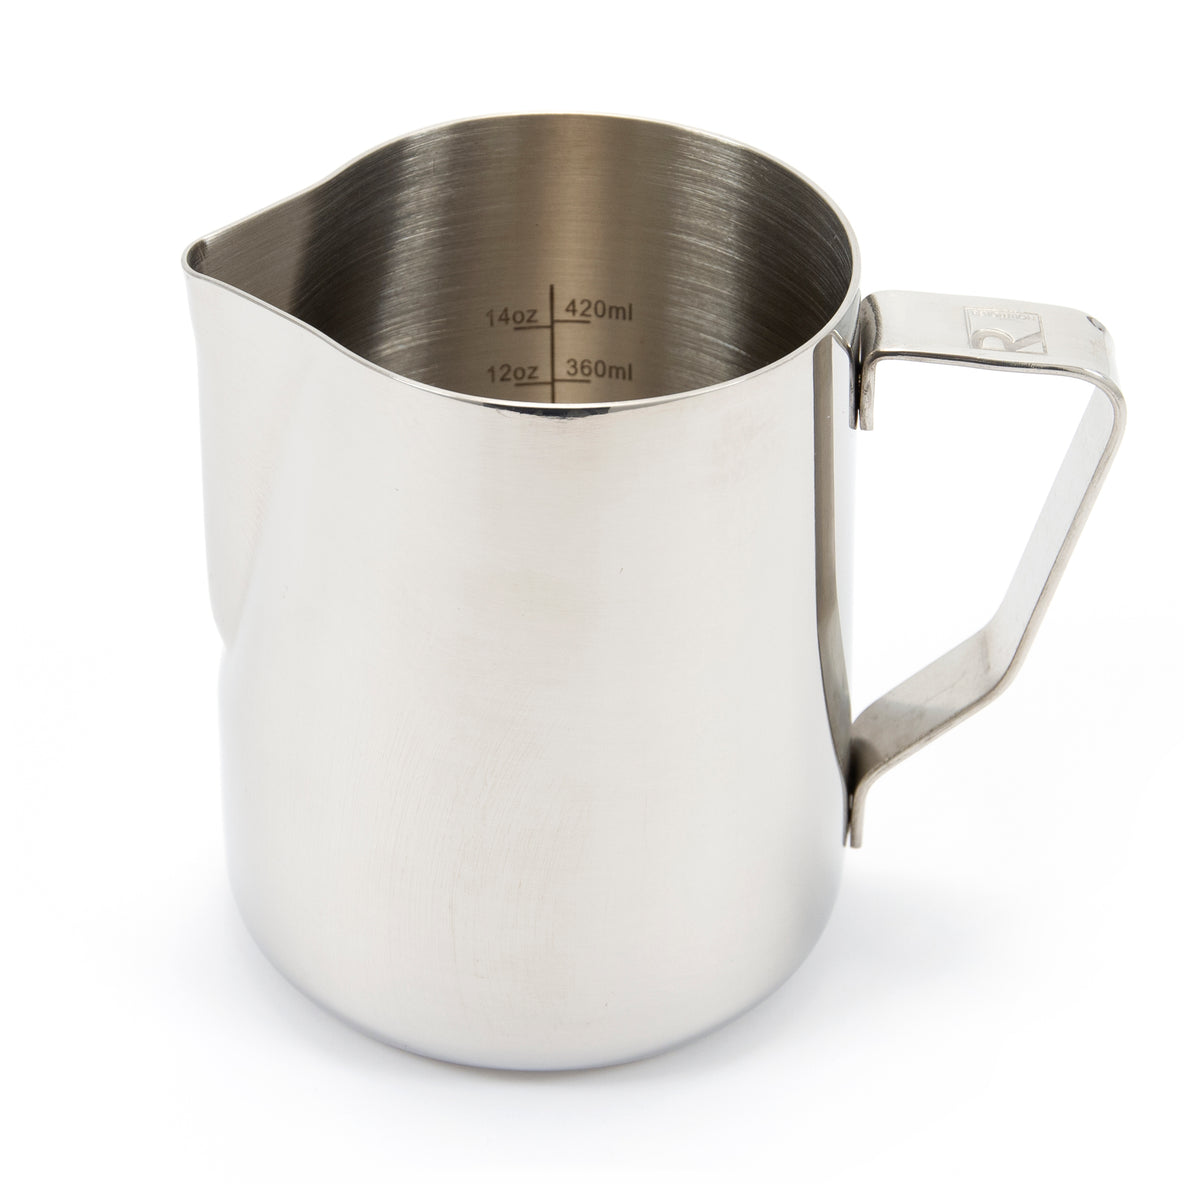 Revolution Original Stainless Steel Steaming Pitchers